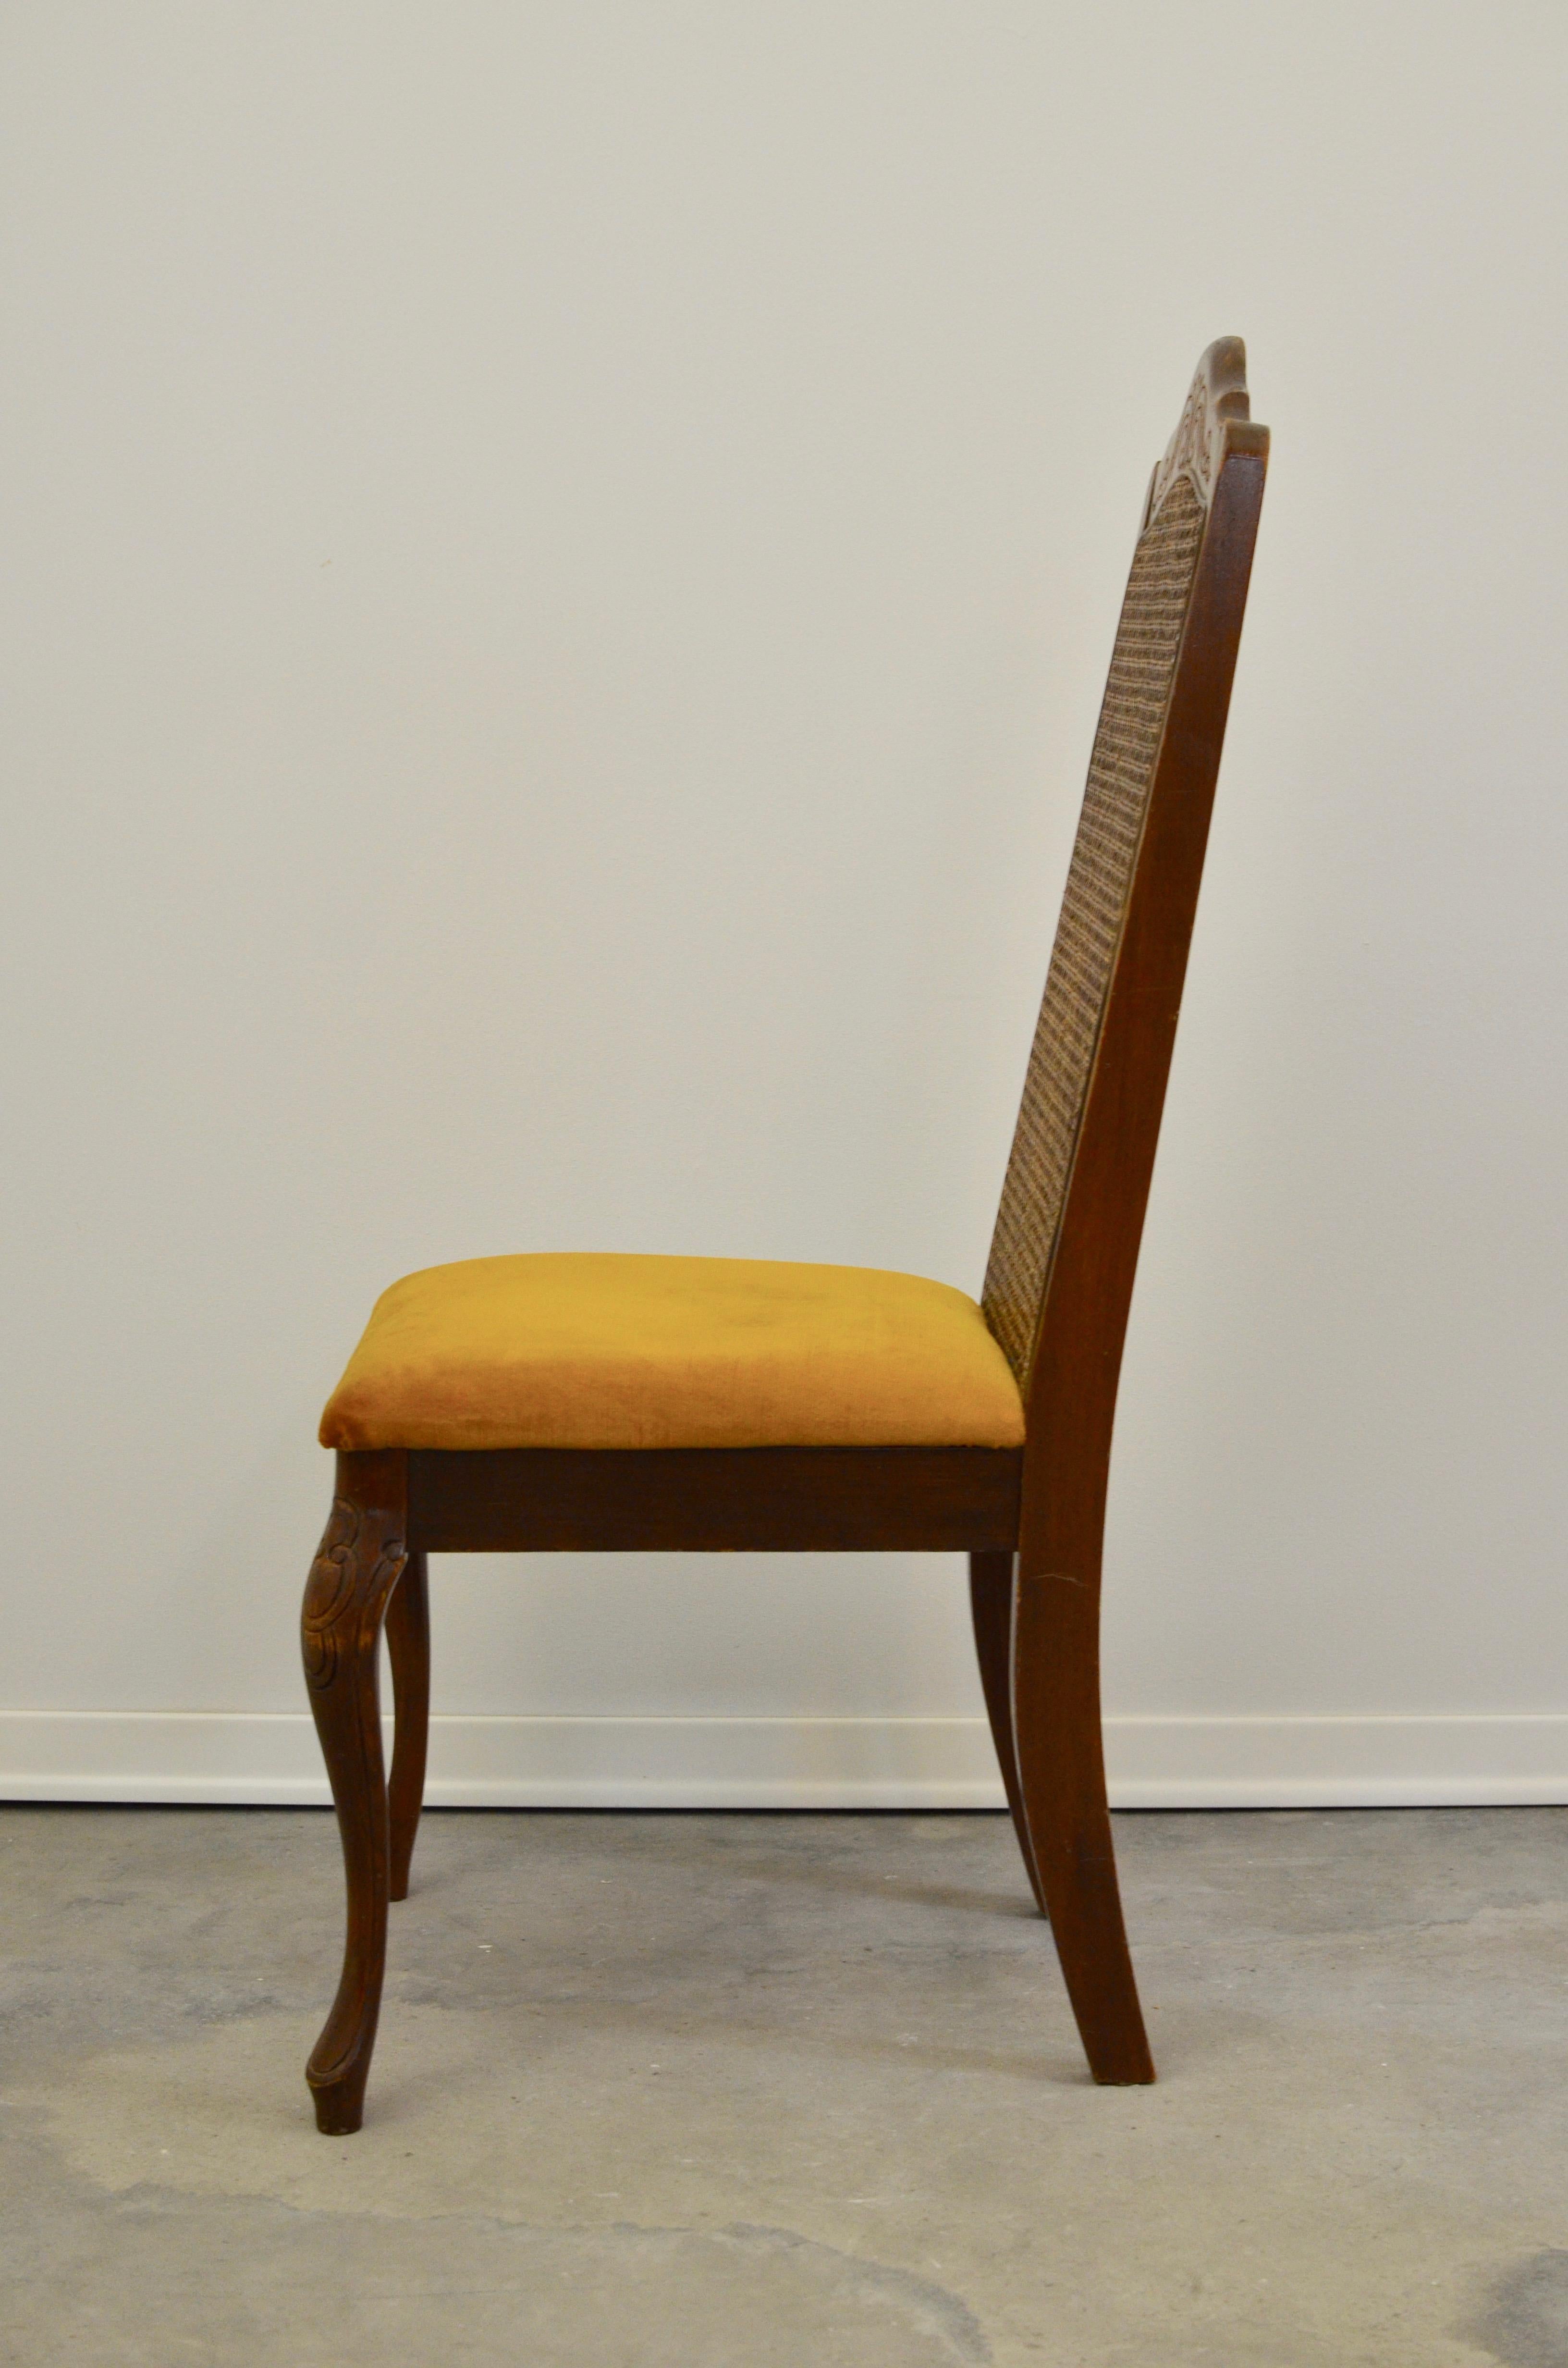 Vintage dining chair

Period: 1960s

Country of Manufacturer: Slovenia/Yugoslavia

Materials: wood, cane back, textile.

It is really comfortable chair to sit on. High back forces you to sit straight and upright.

It has a beautiful vintage patina